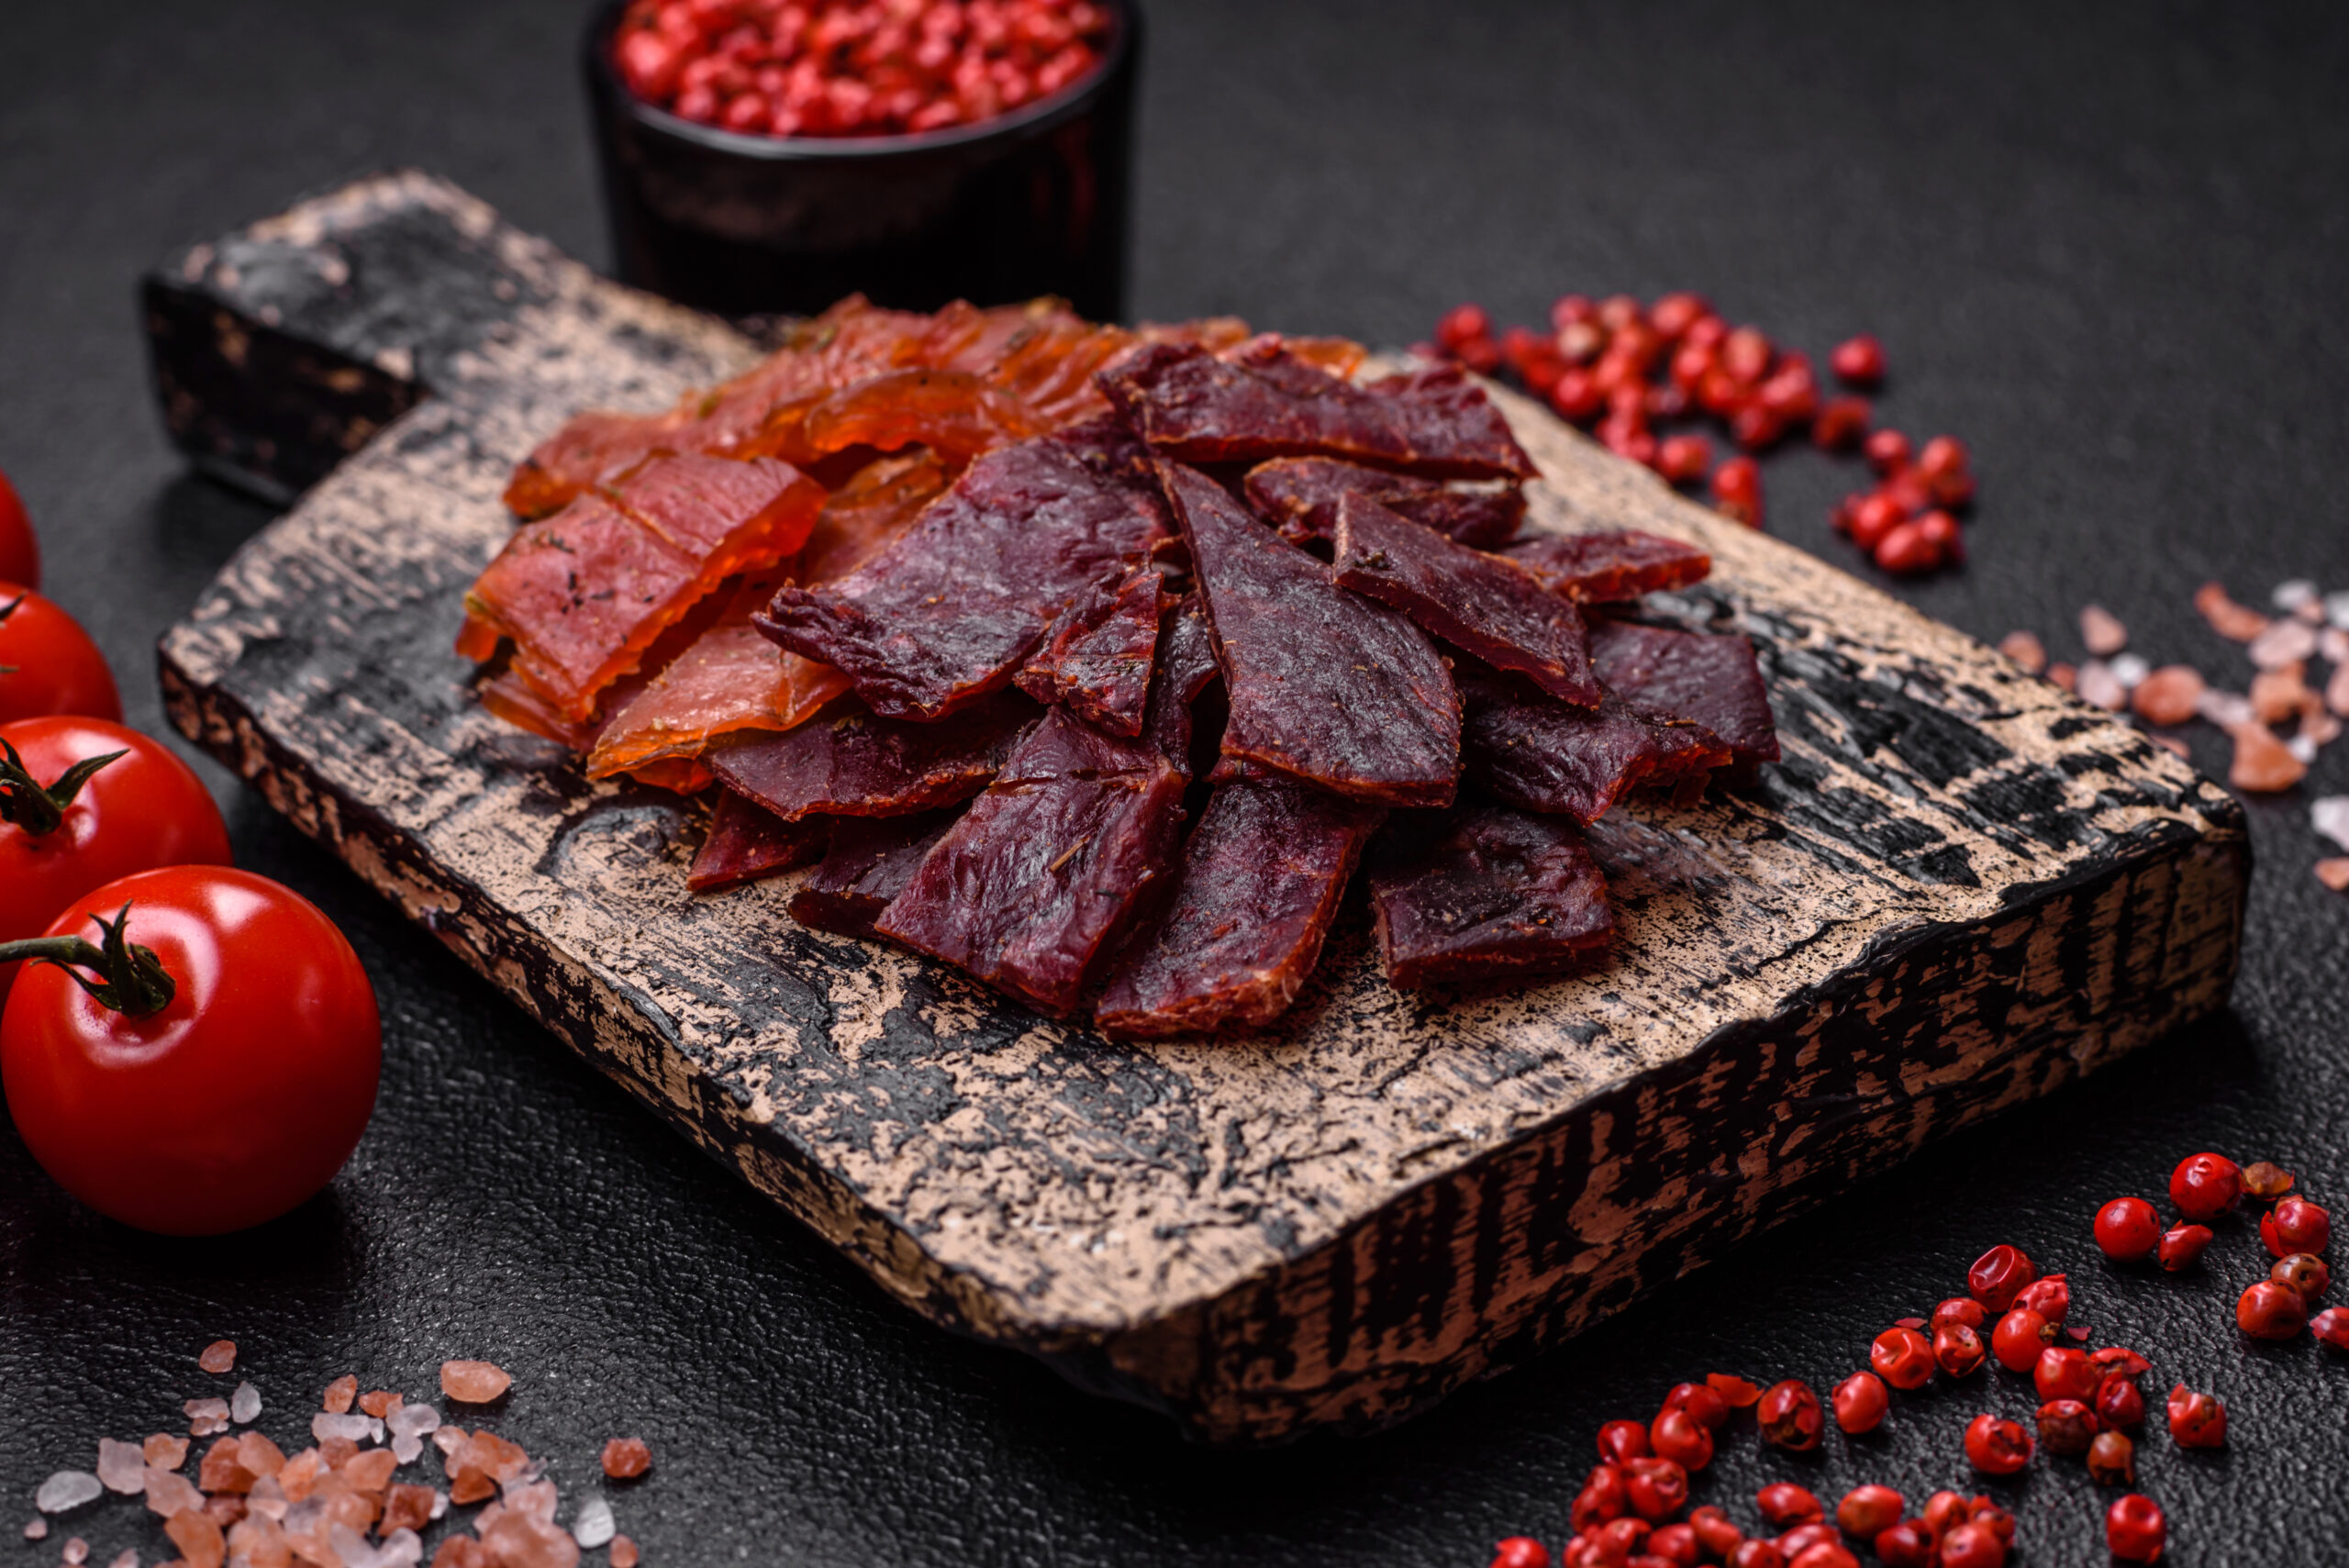 delicious-dried-veal-or-turkey-jerky-with-salt-sp-2023-11-27-05-24-45-utc-scaled.jpg